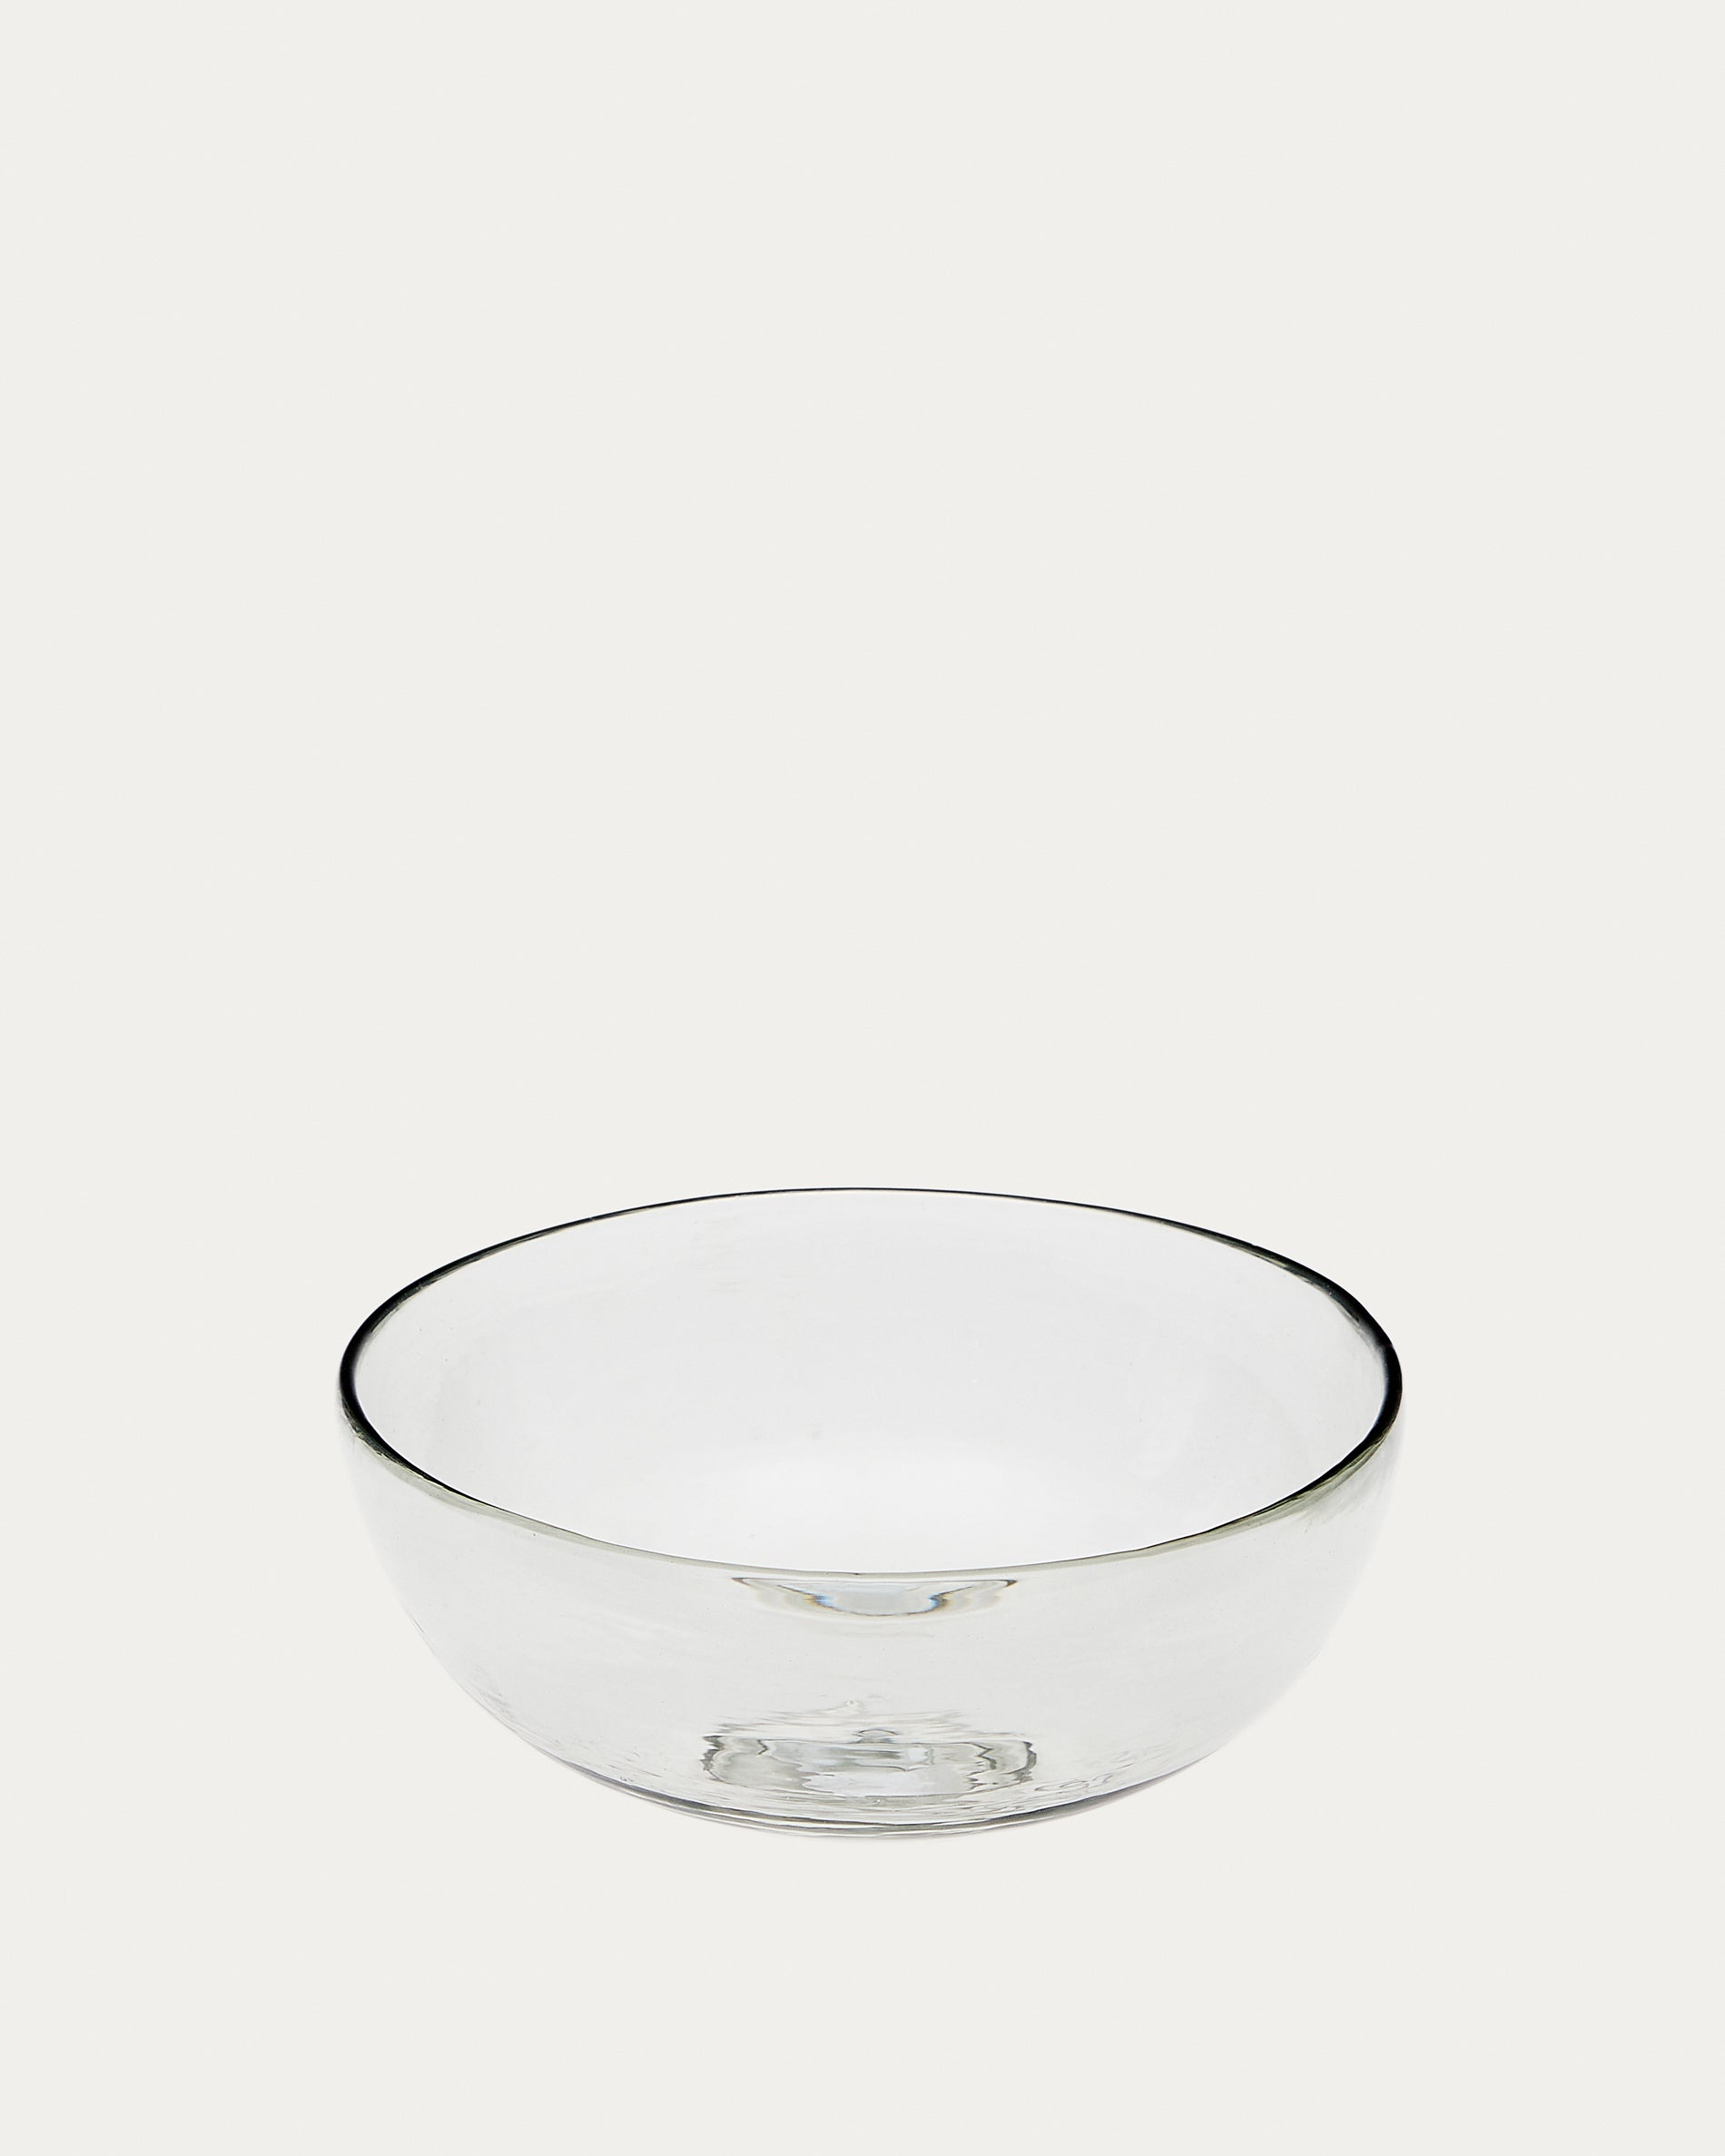 Silitia large bowl, made of transparent recycled glass